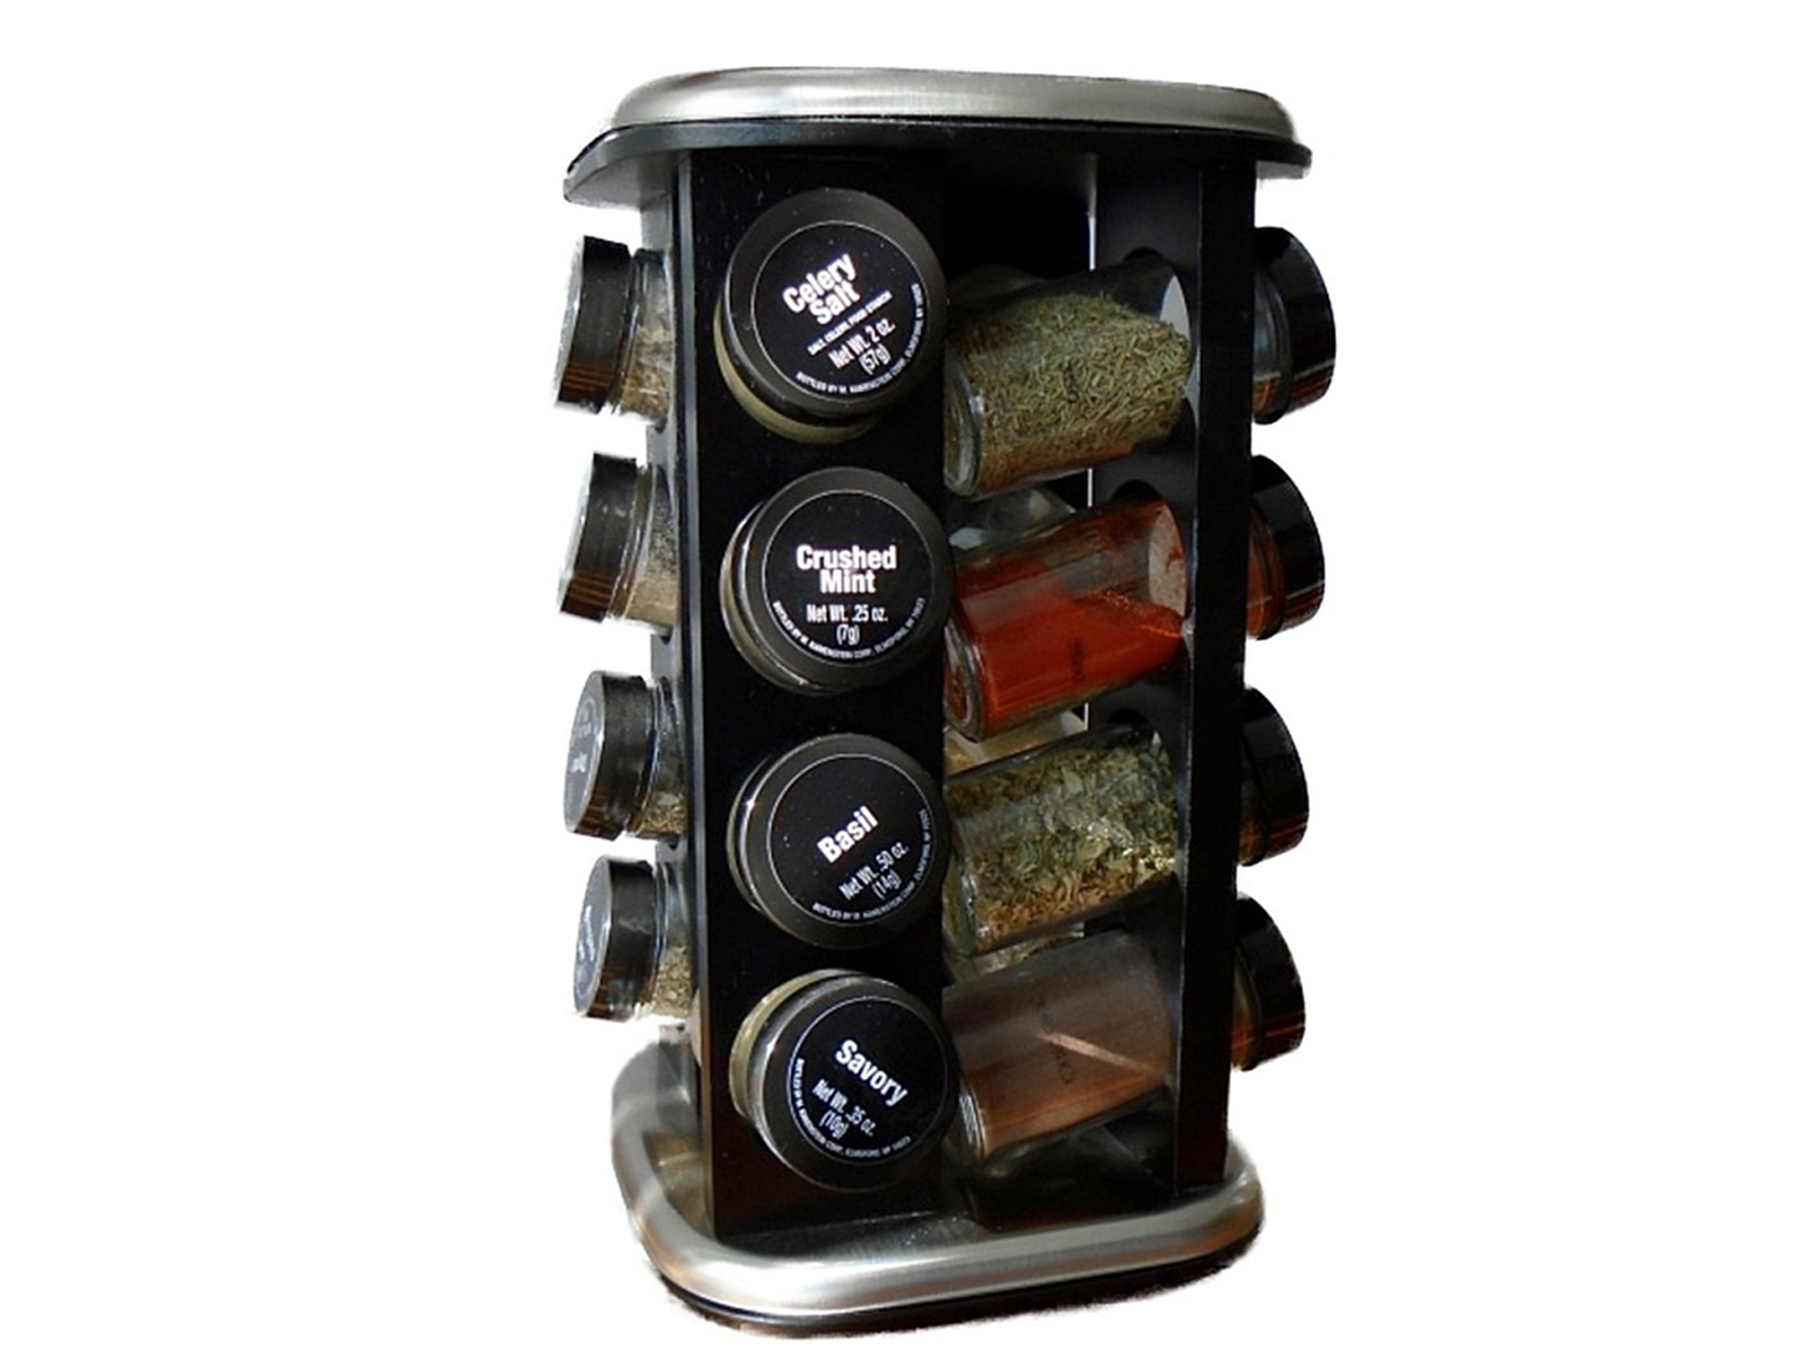 Typical spice rack